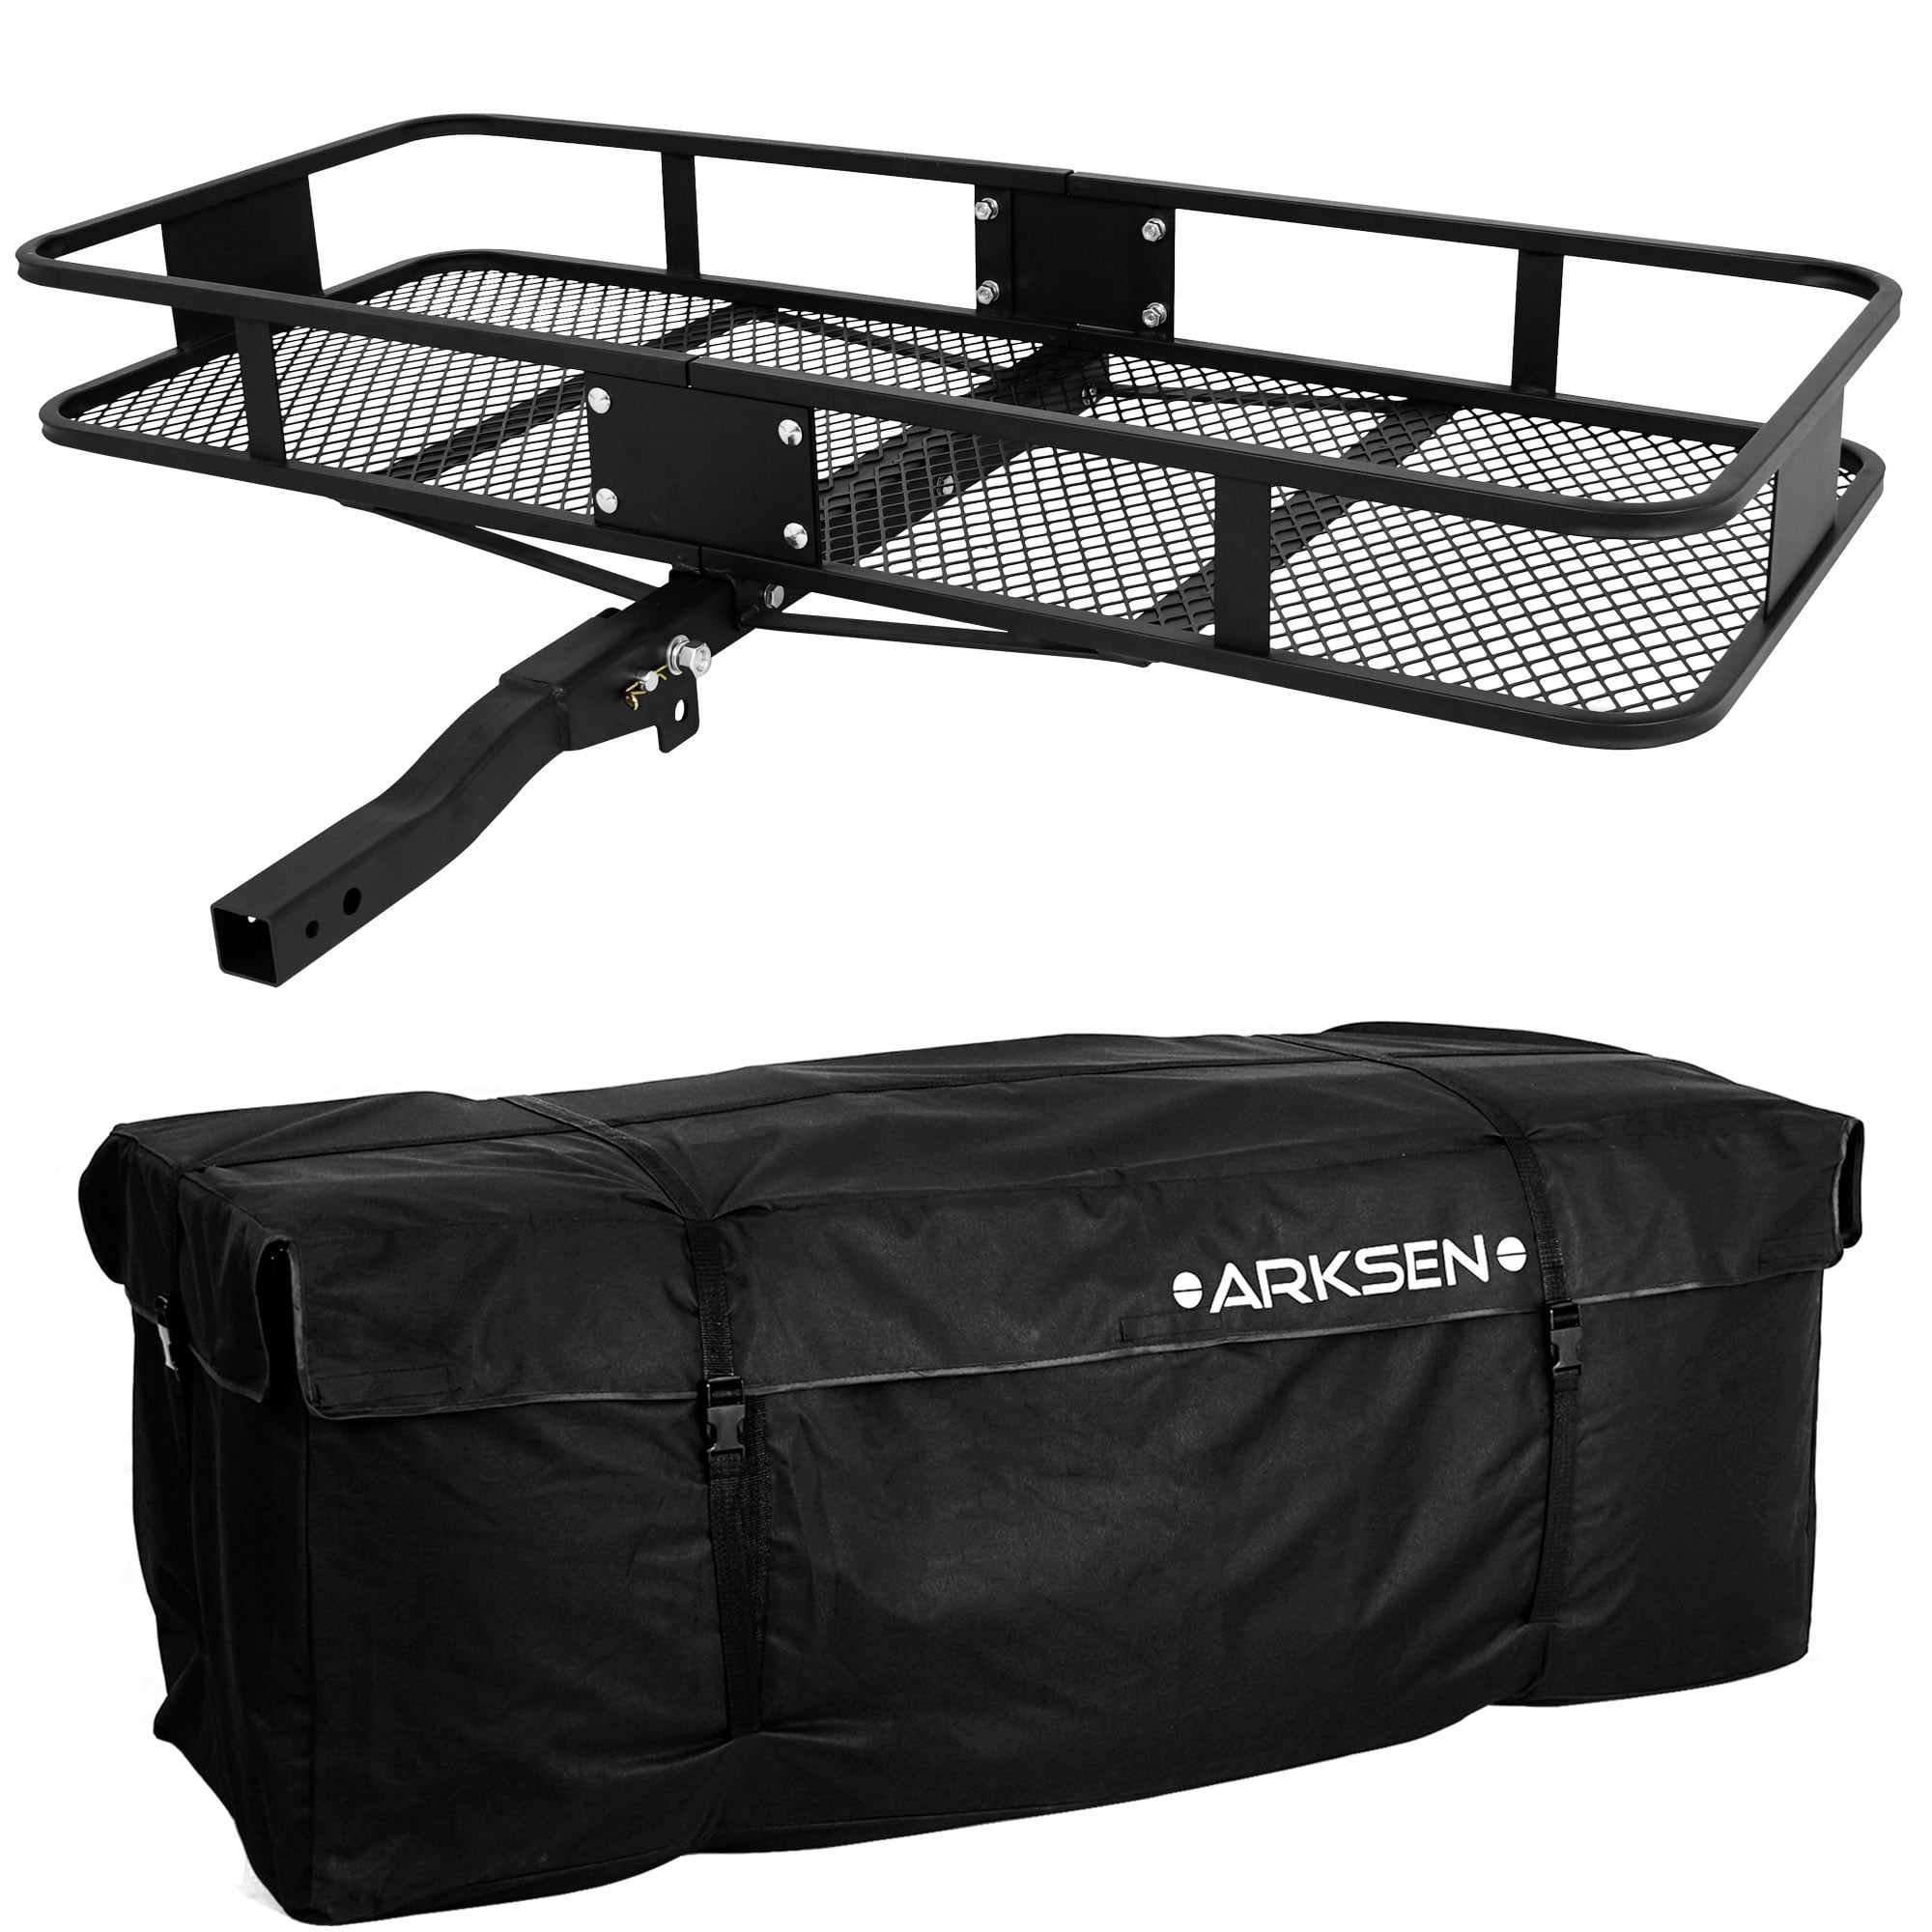 Black ARKSEN 60 x 24 x 6 Hitch Mount Angled Shank Cargo Carrier Luggage Basket Fit 2 Receiver 500LBS Capacity Camp Travel SUV Camping 